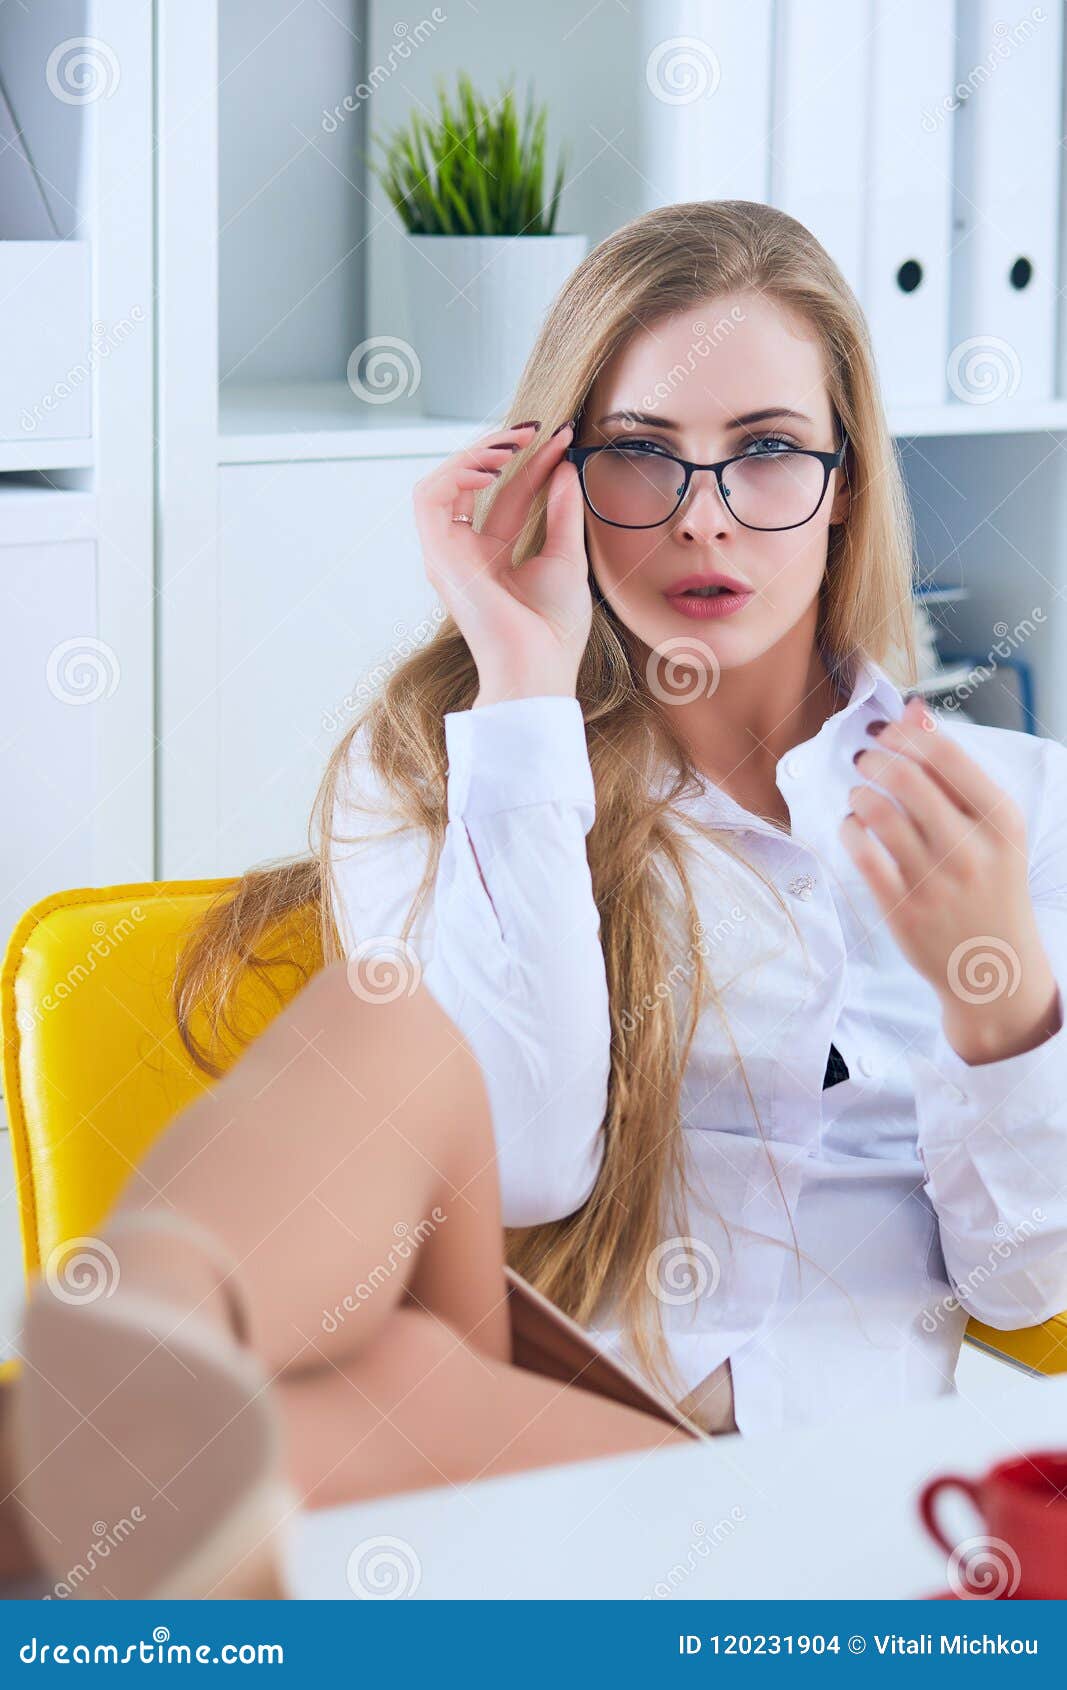 Office Flirt - Attractive Woman Flirting Over Desk with Her Coworker or  Boss. Stock Photo - Image of indoors, desk: 120231904